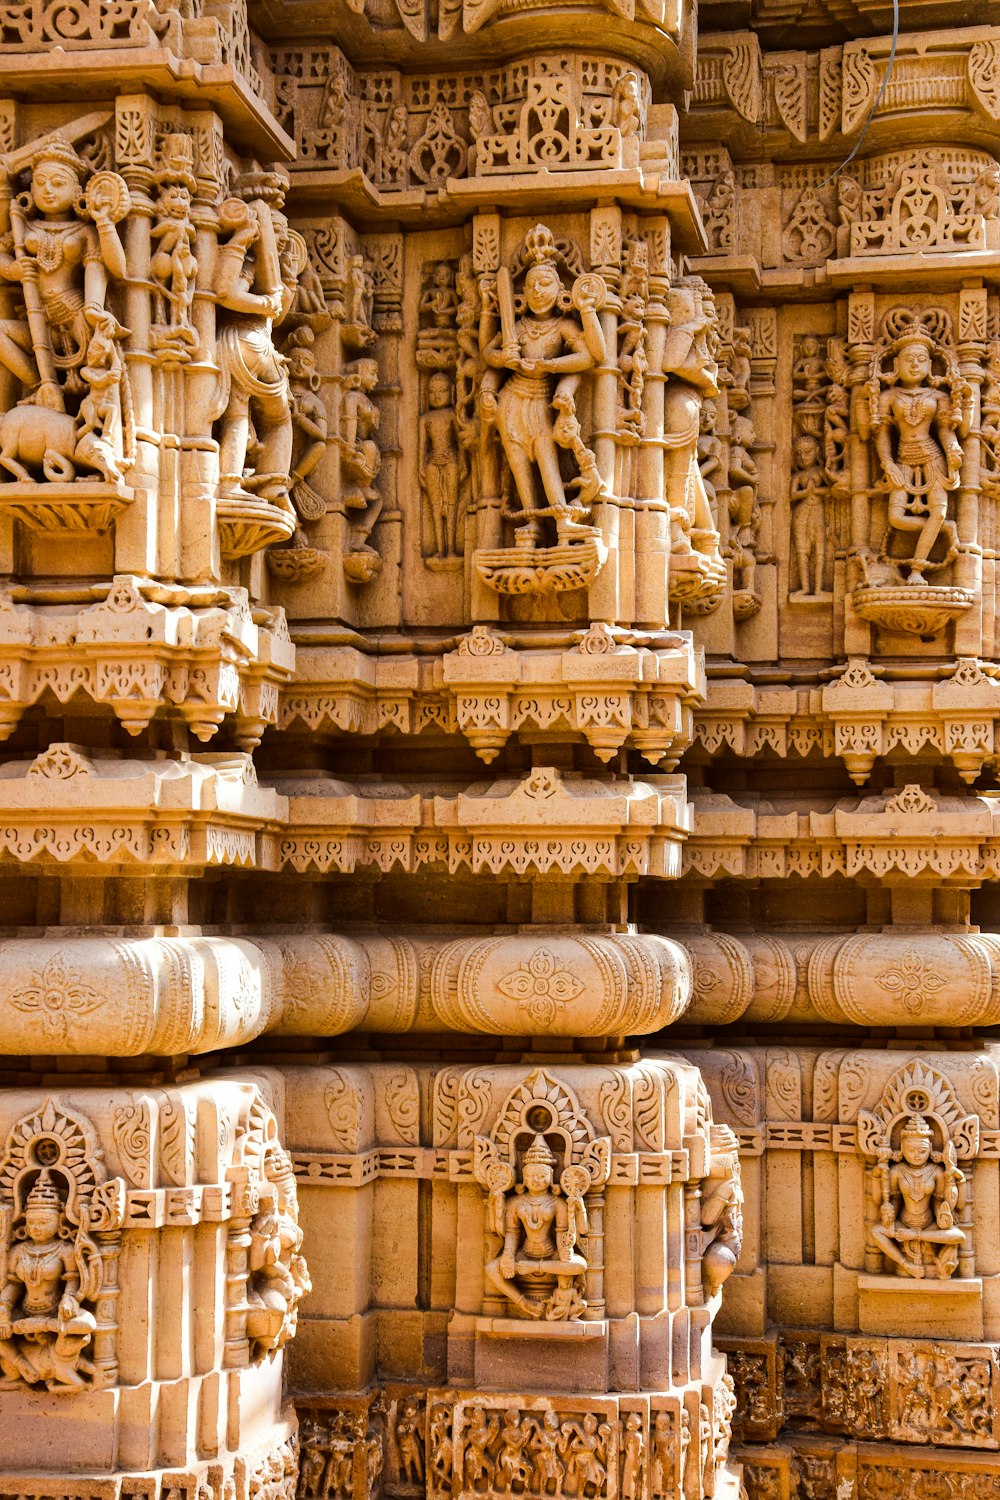 a close up of a wall with carvings on it